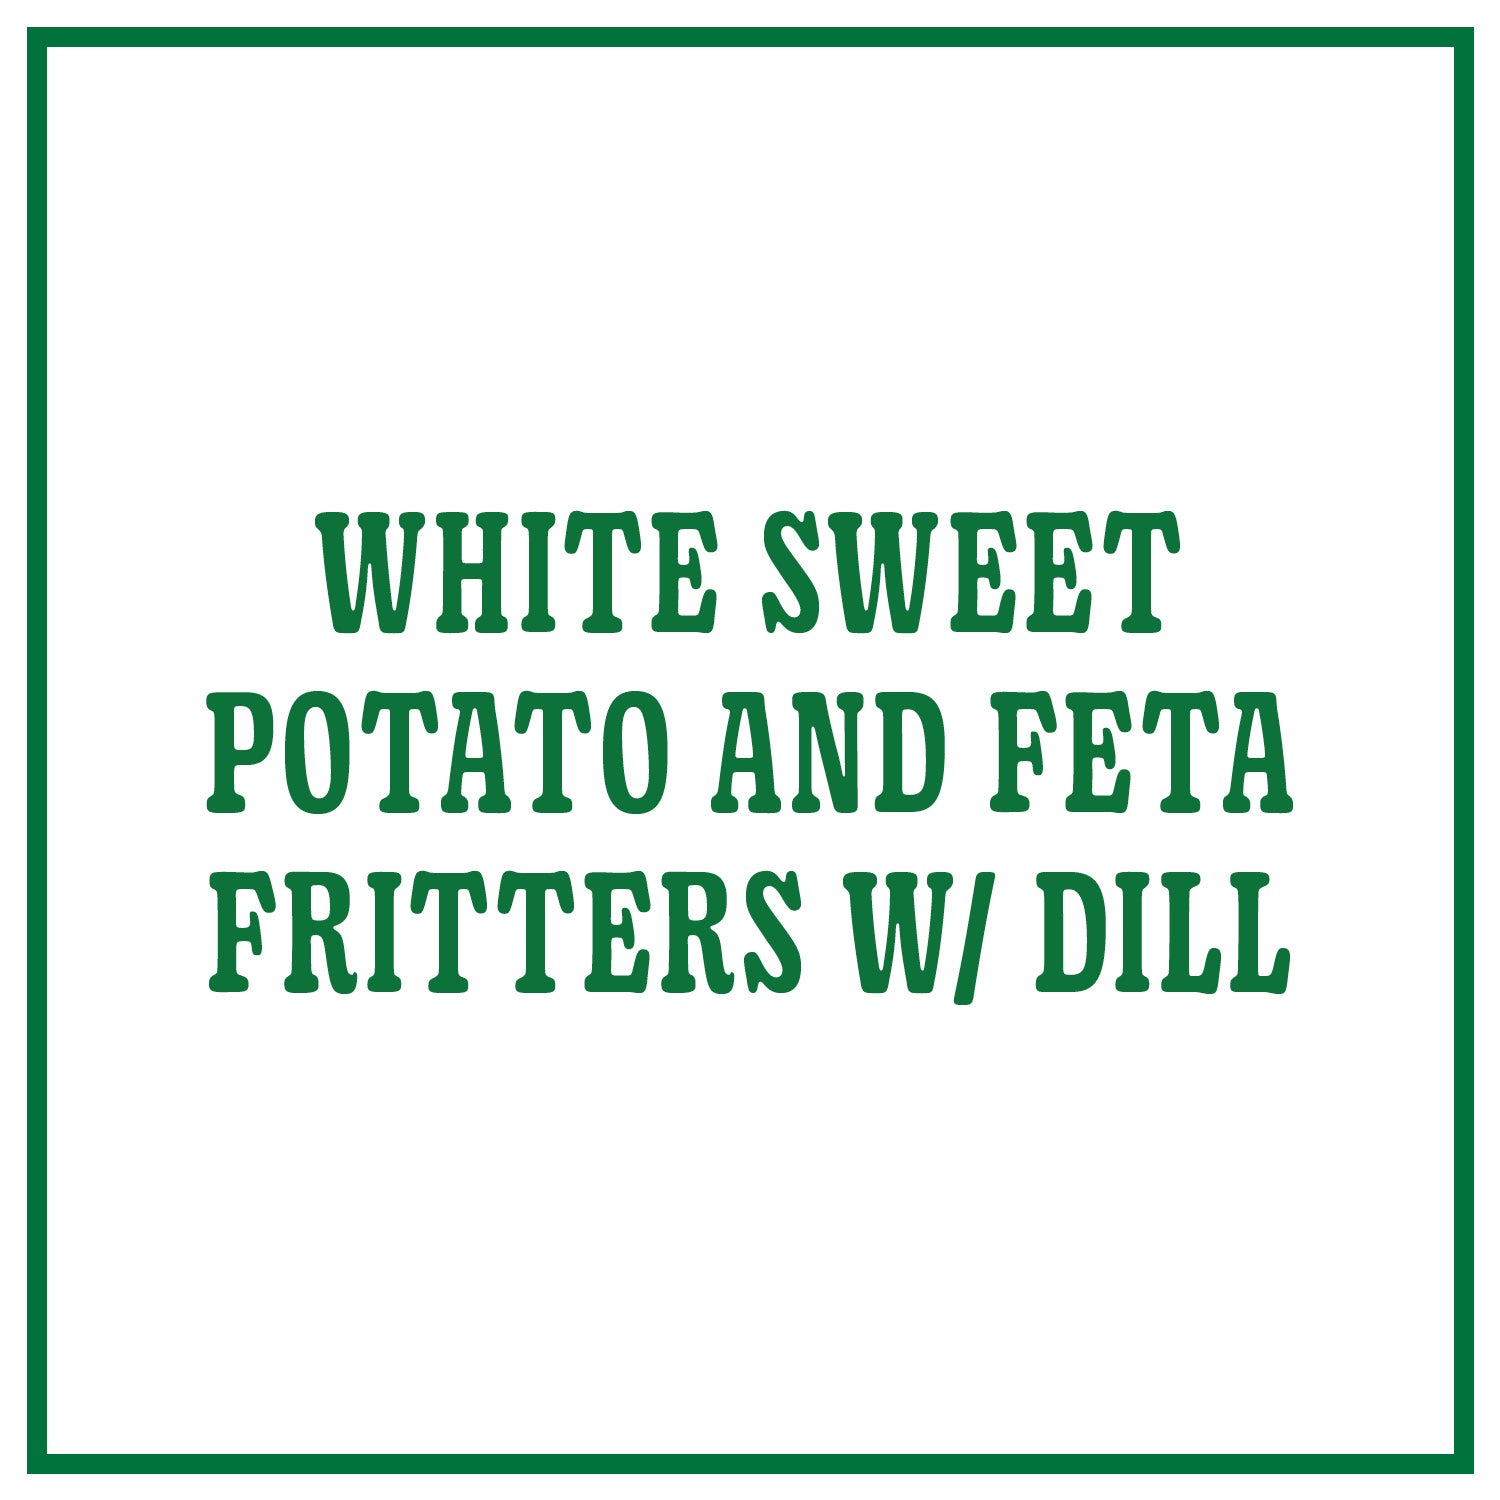 White Sweet Potato and Feta Fritters with Dill